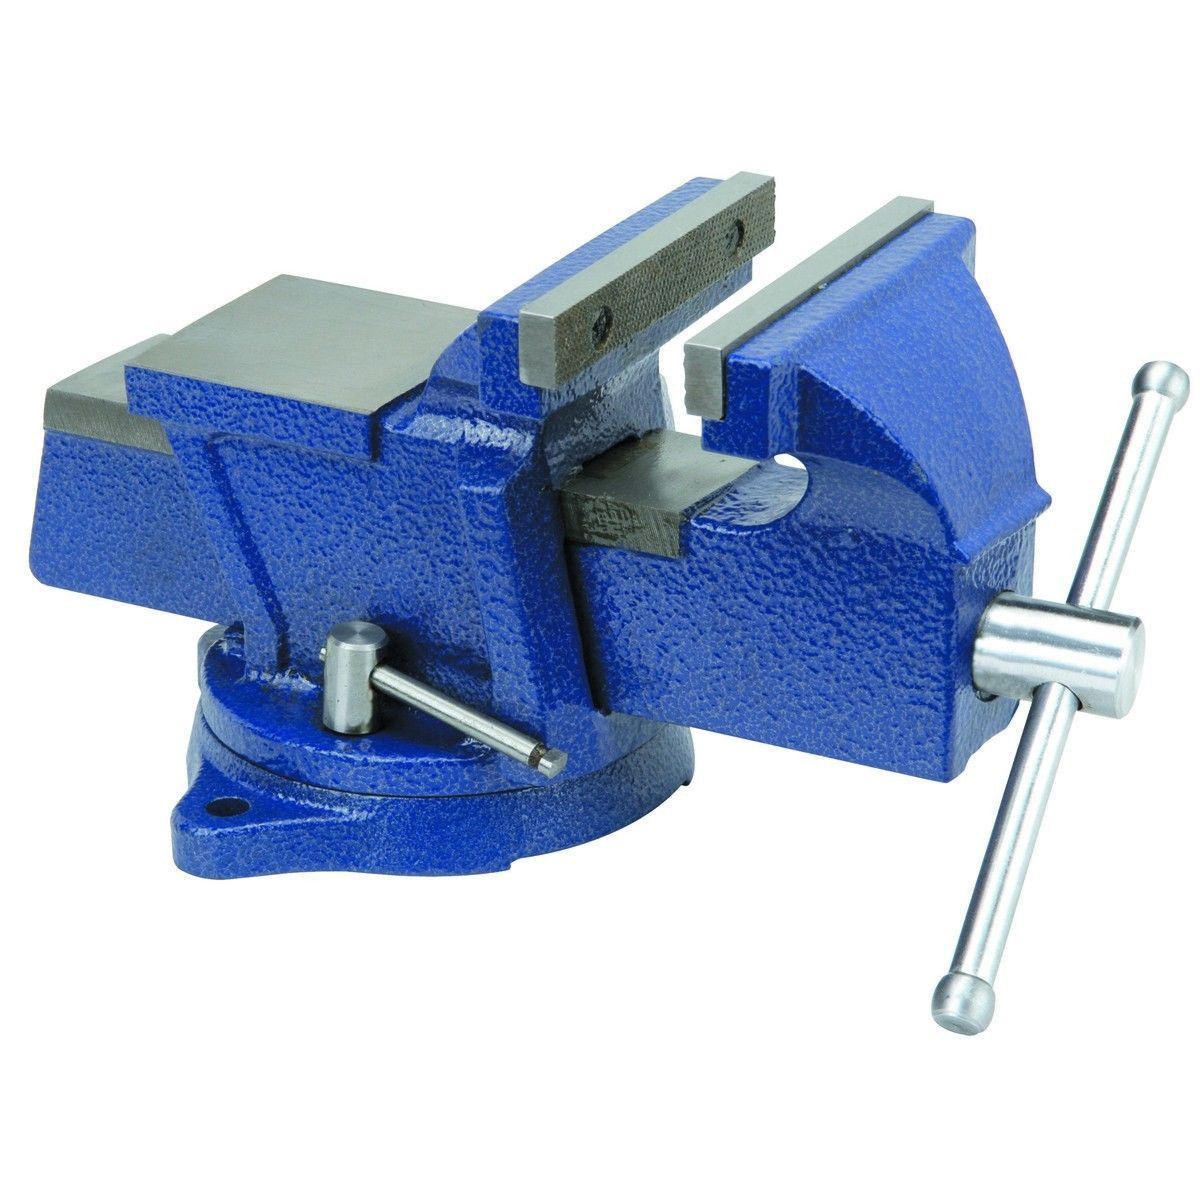 Cb17213 5 In. Bench Vise With Anvil Swivel Locking Base Tabletop Clamp Heavy Duty Steel